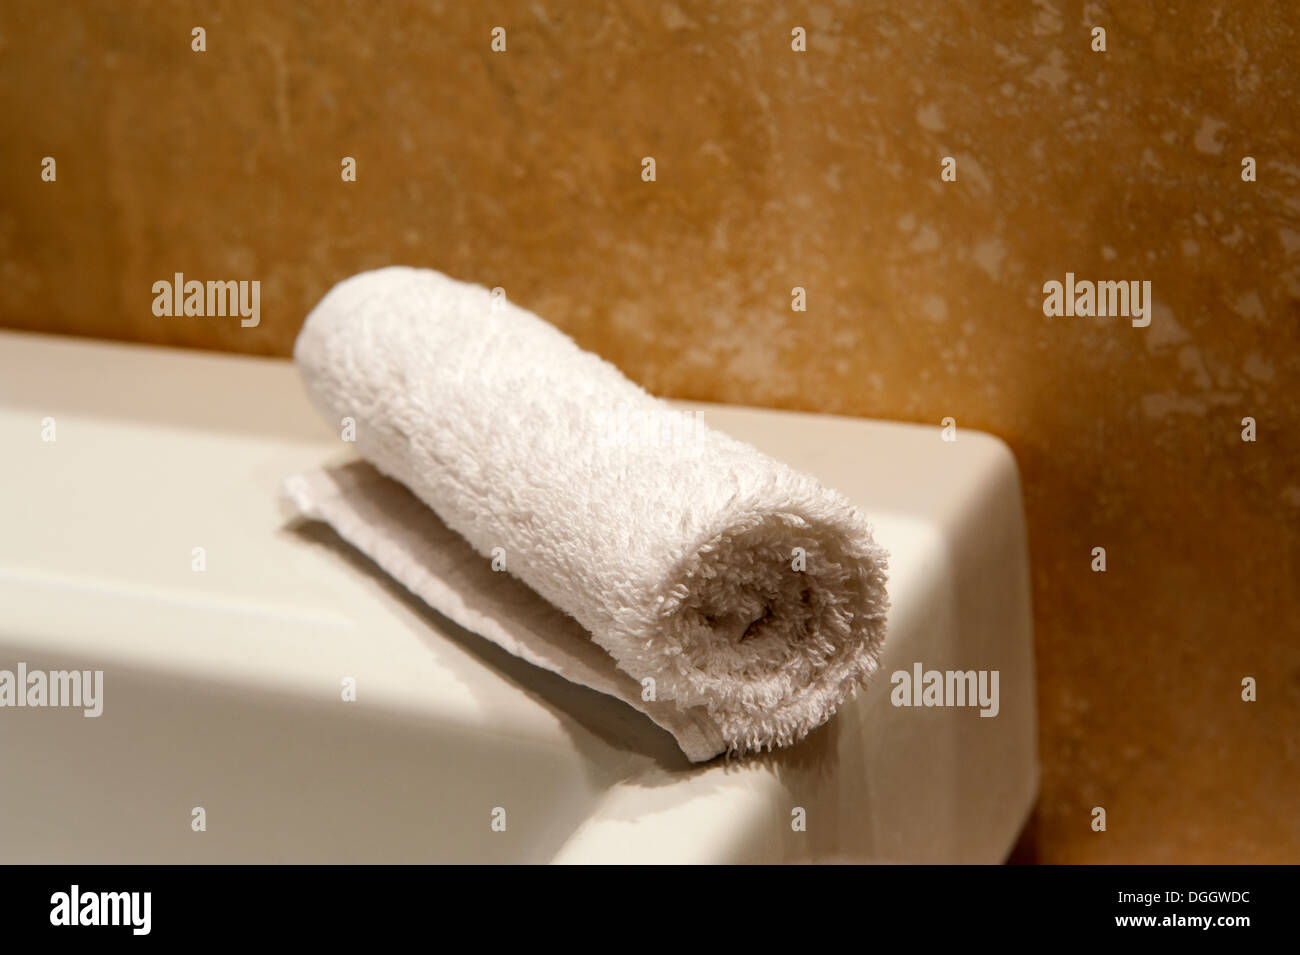 Modern Bathroom Sink Rolled Face Towel Flannel Stock Photo